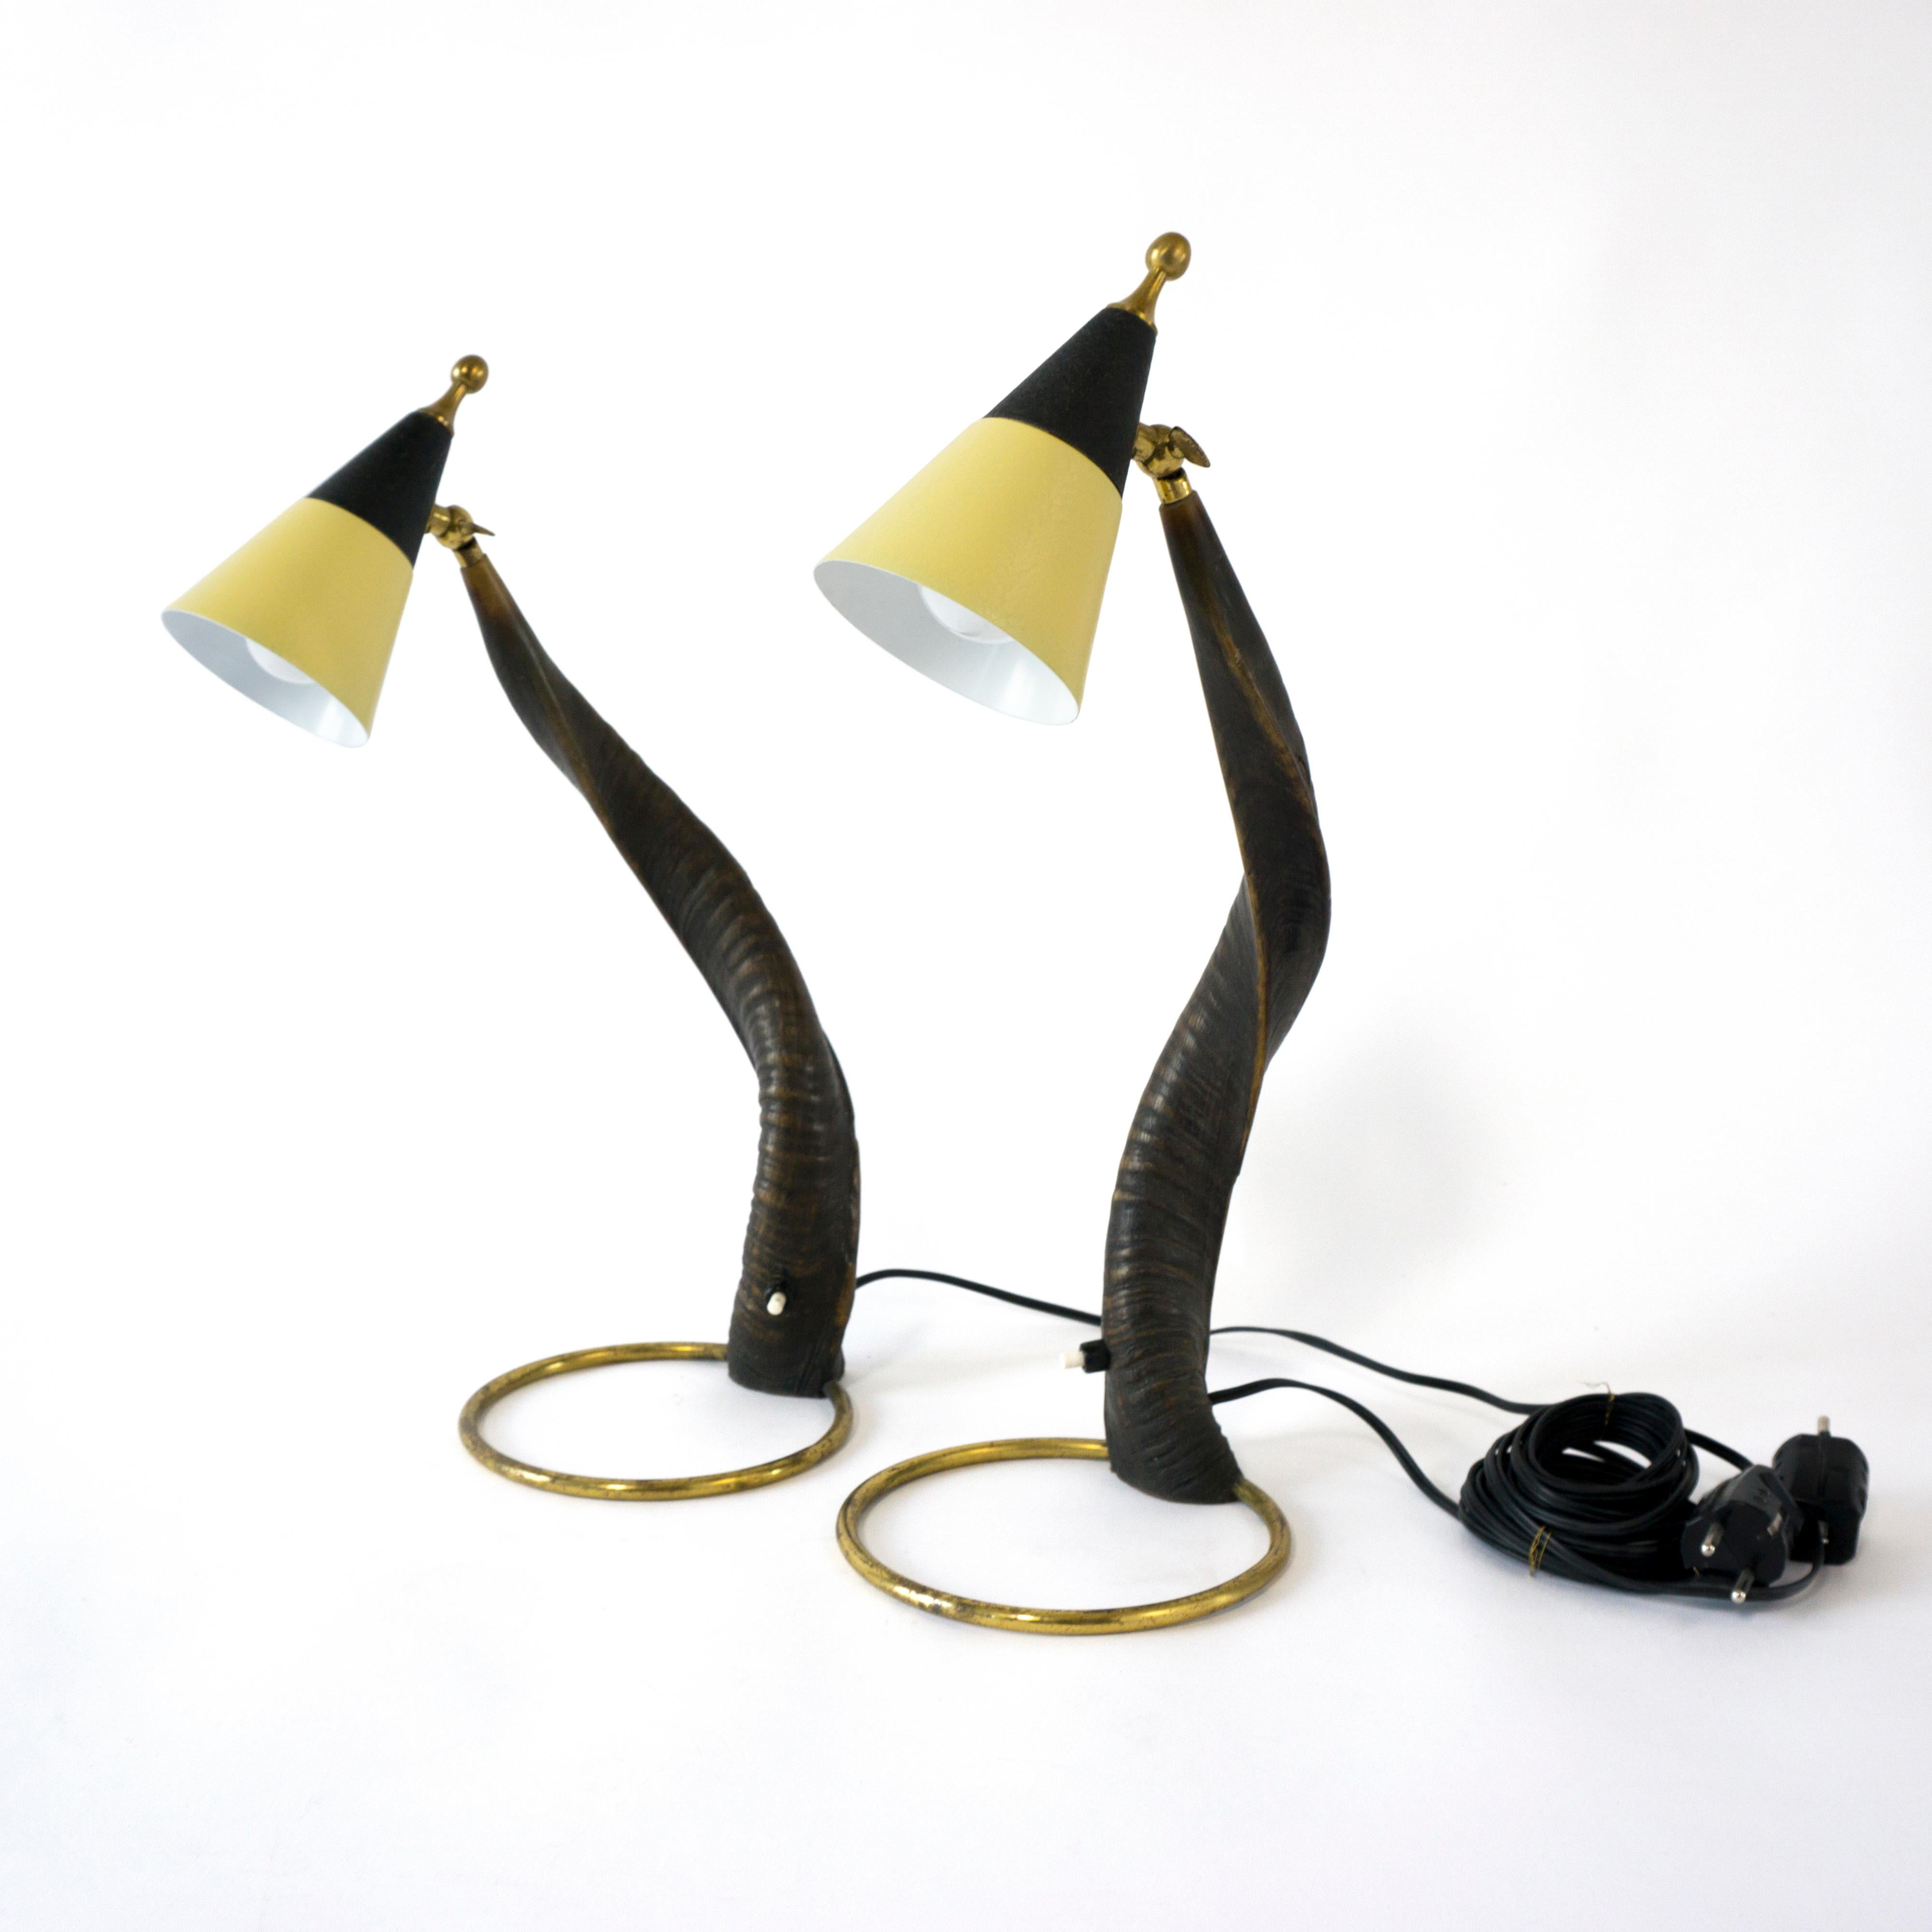  Pair of Vintage Mid Century 1950s Horn & Brass Bedside Table Lamps For Sale 7